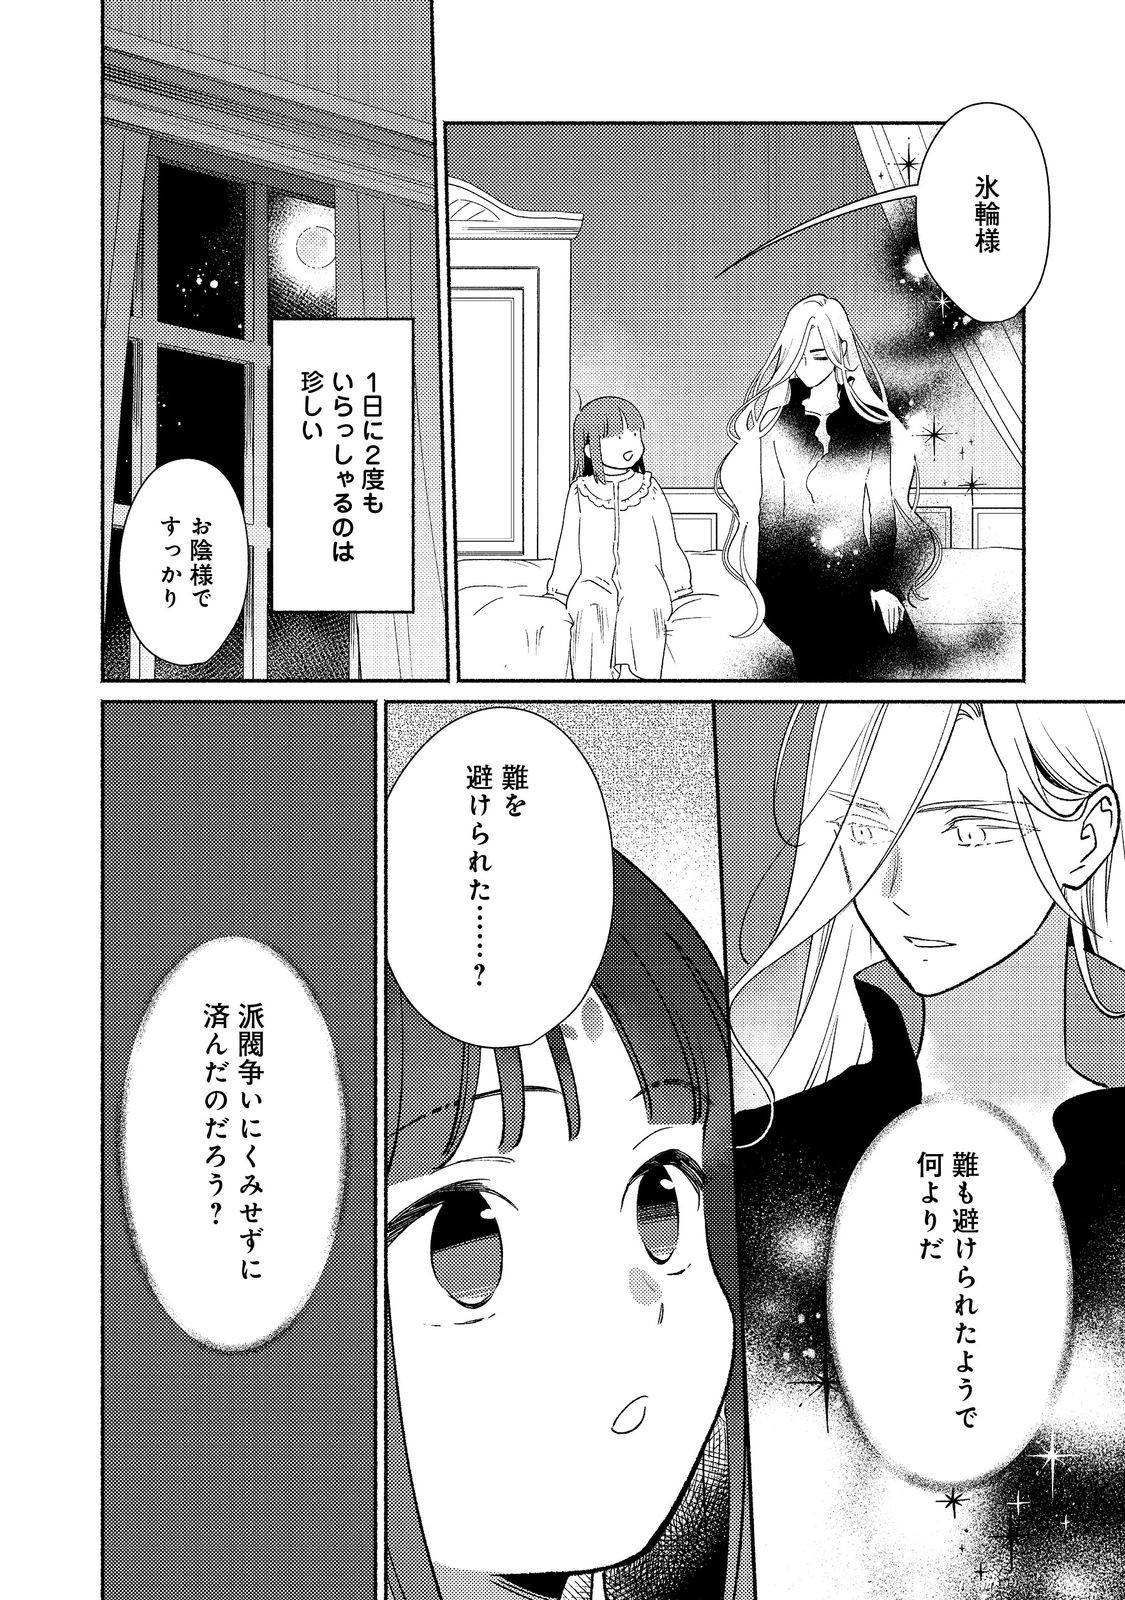 I’m the White Pig Nobleman 第23.2話 - Page 1